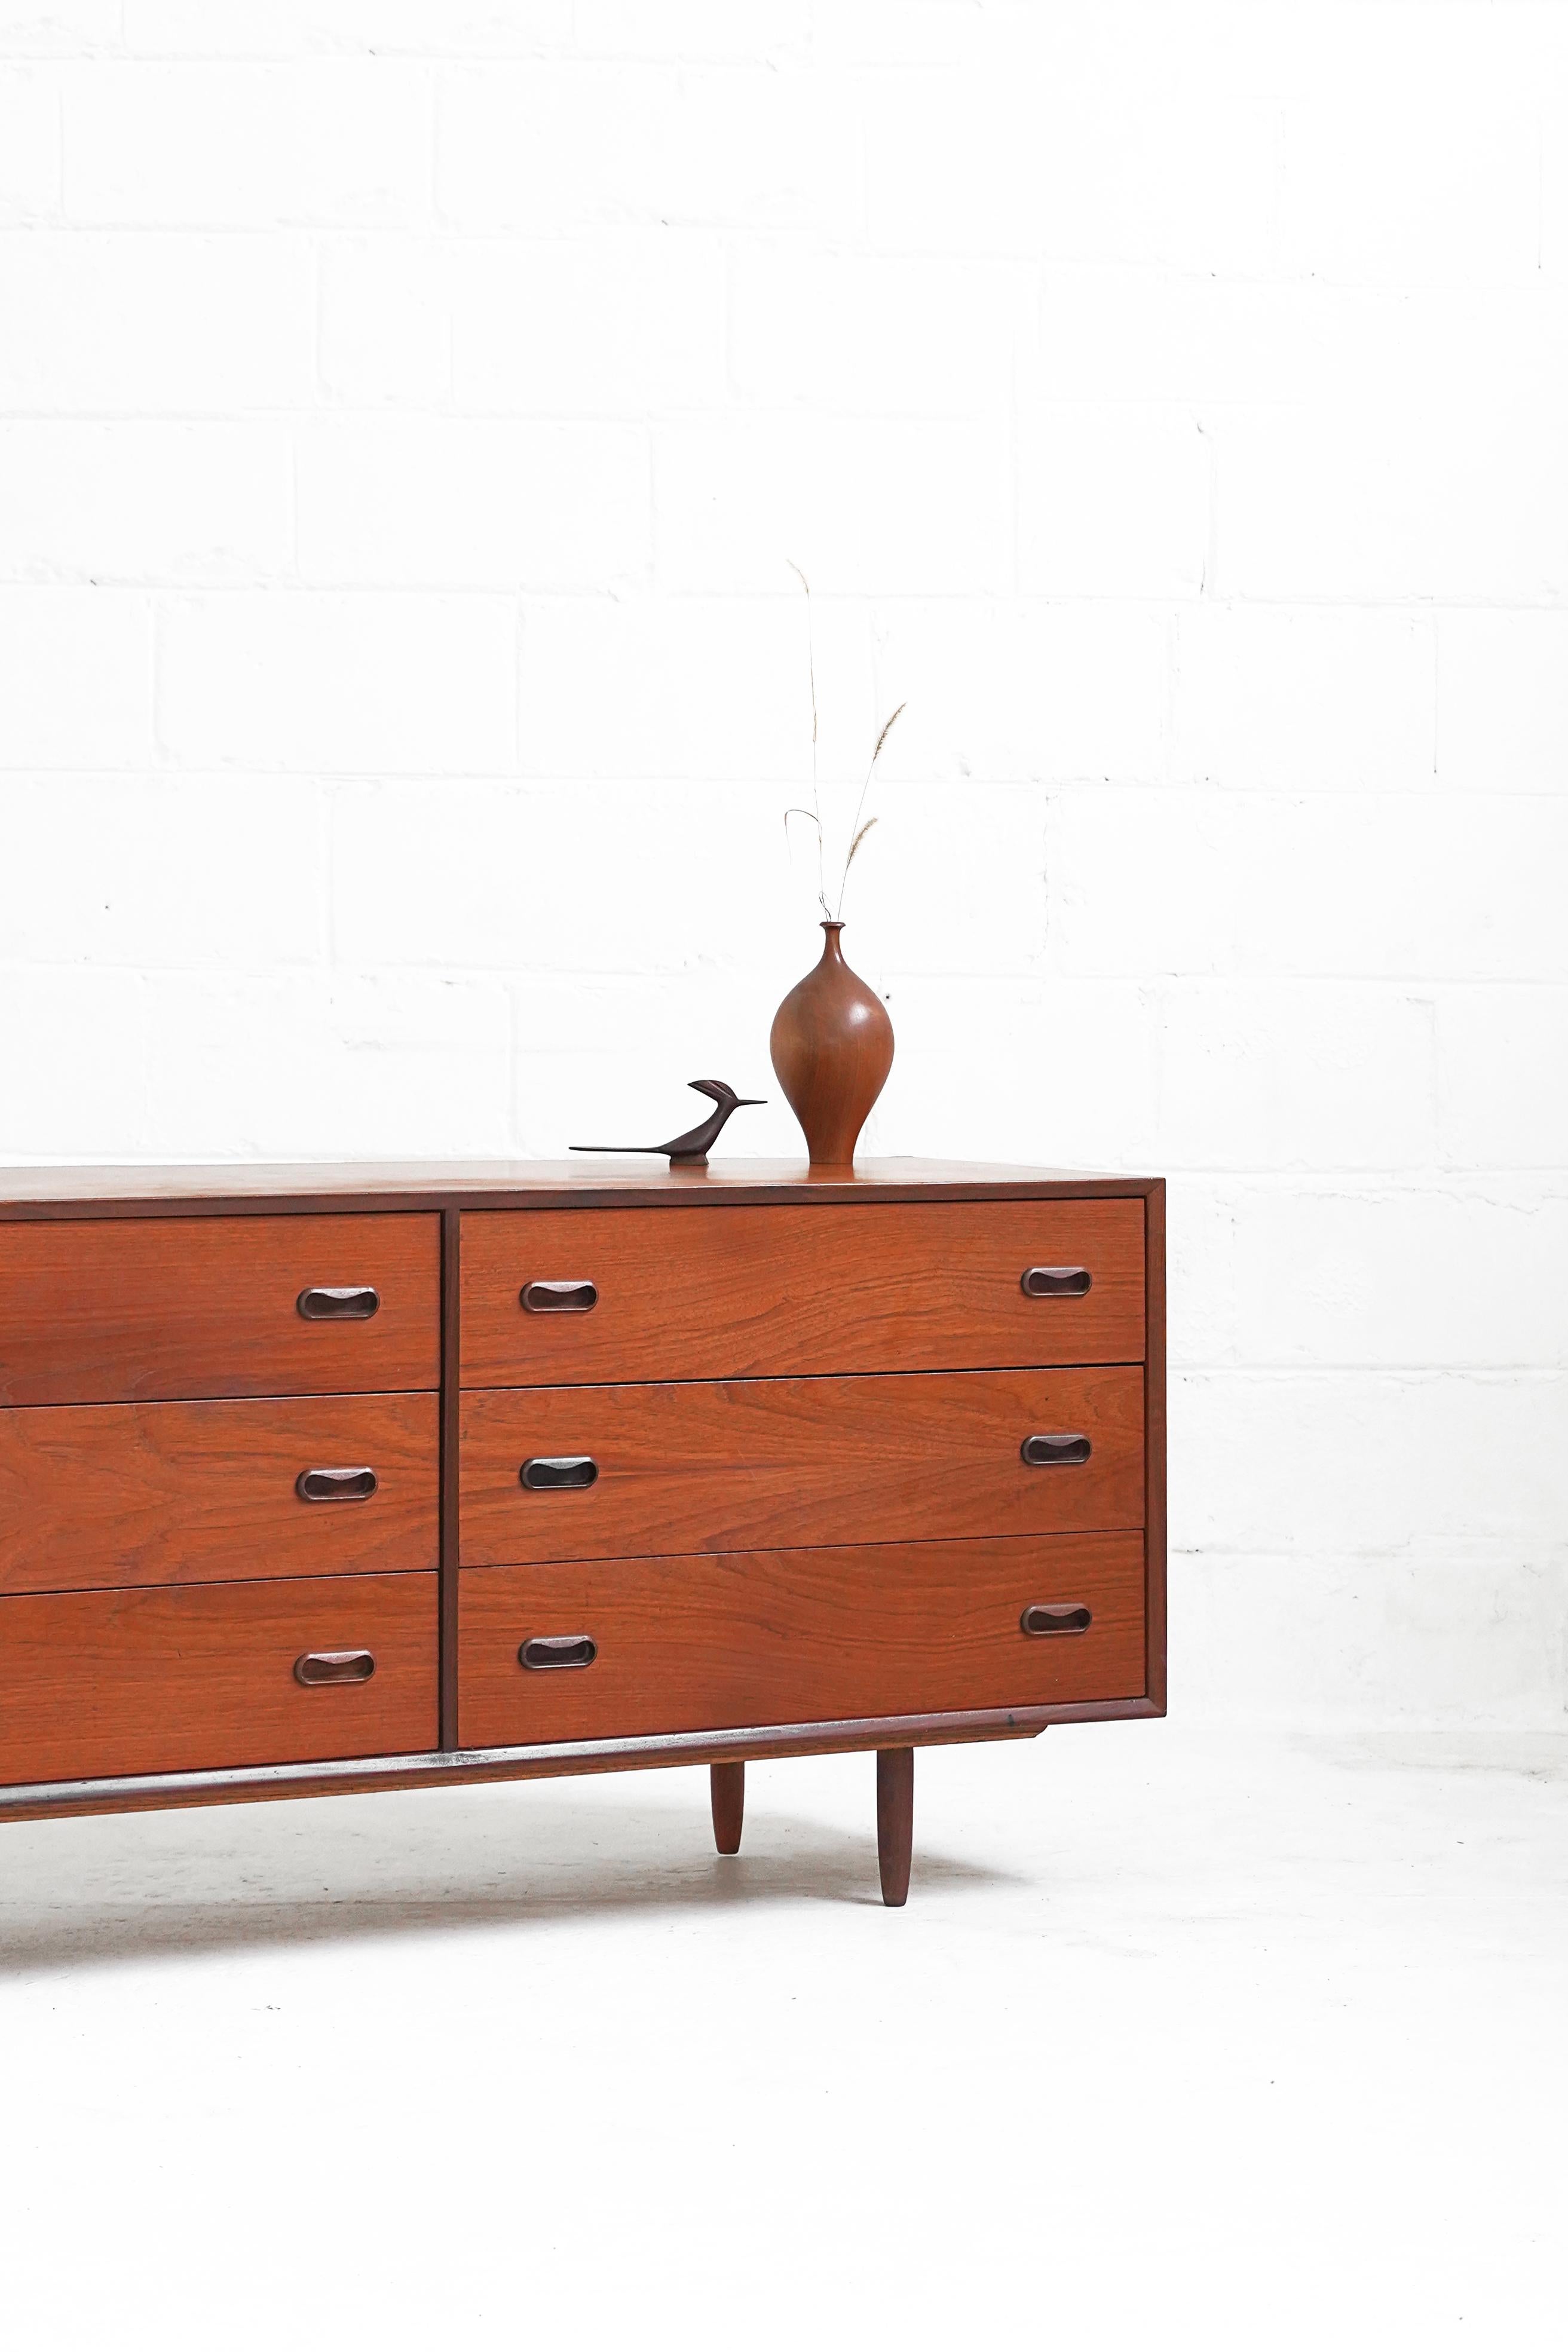 Stunning 6 drawer dresser by well-known Canadian manufacturer, Punch Design. Beautiful details, with solid teak sculptured pulls and dovetail joinery. In overall good vintage original condition with minor wear, shown in photos.